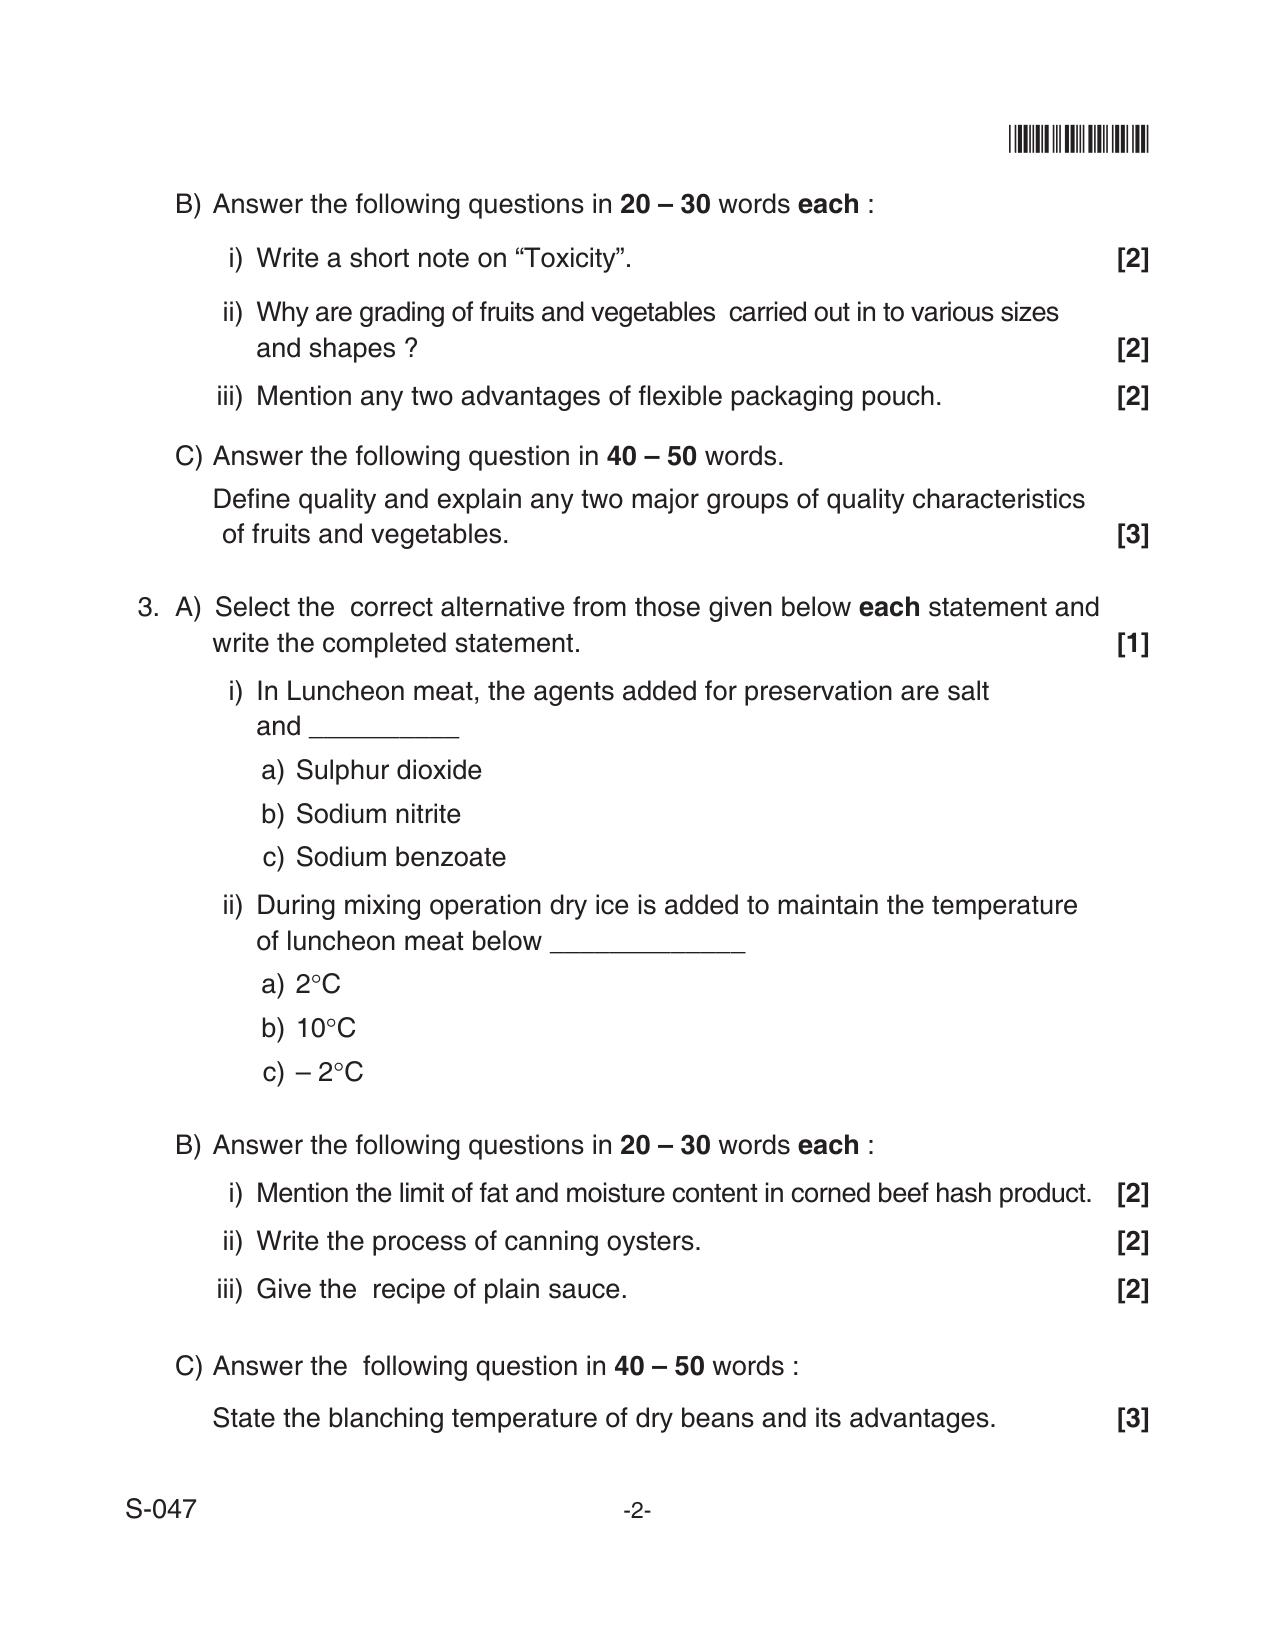 Goa Board Class 10 Food Processing  047 (June 2018) Question Paper - Page 2